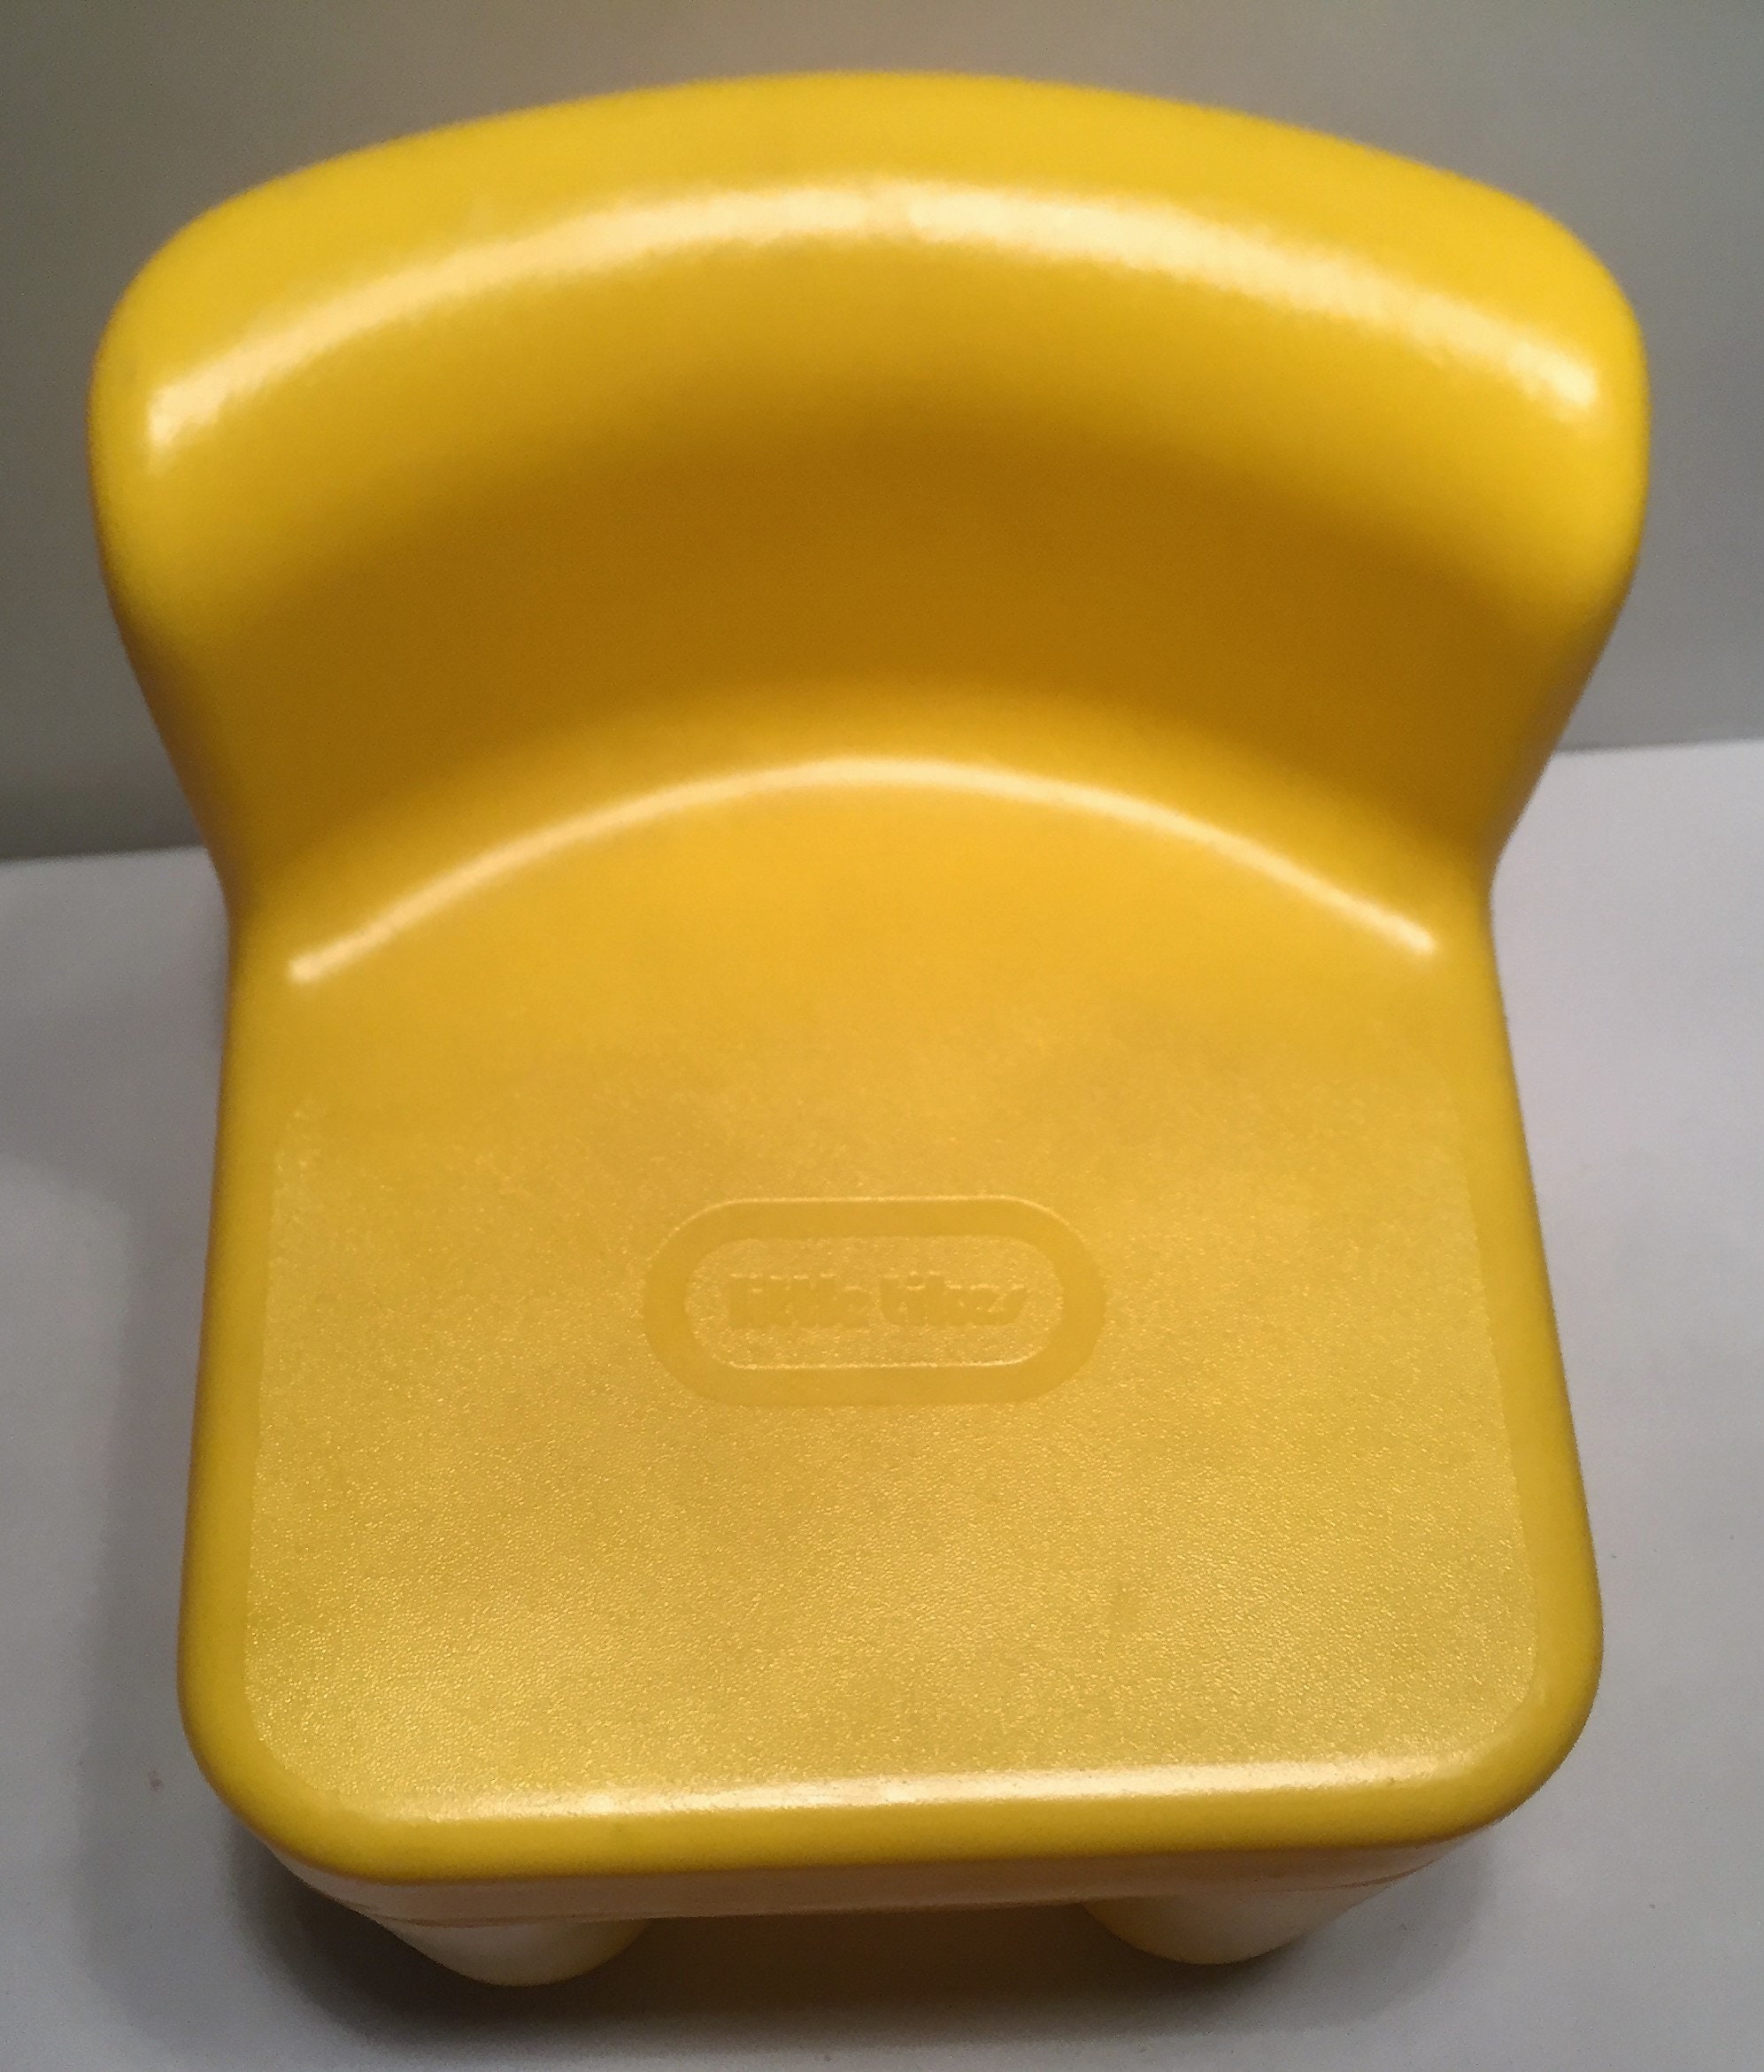 Little Tikes Yellow Chunky Chair In Great Condition Free Shipping